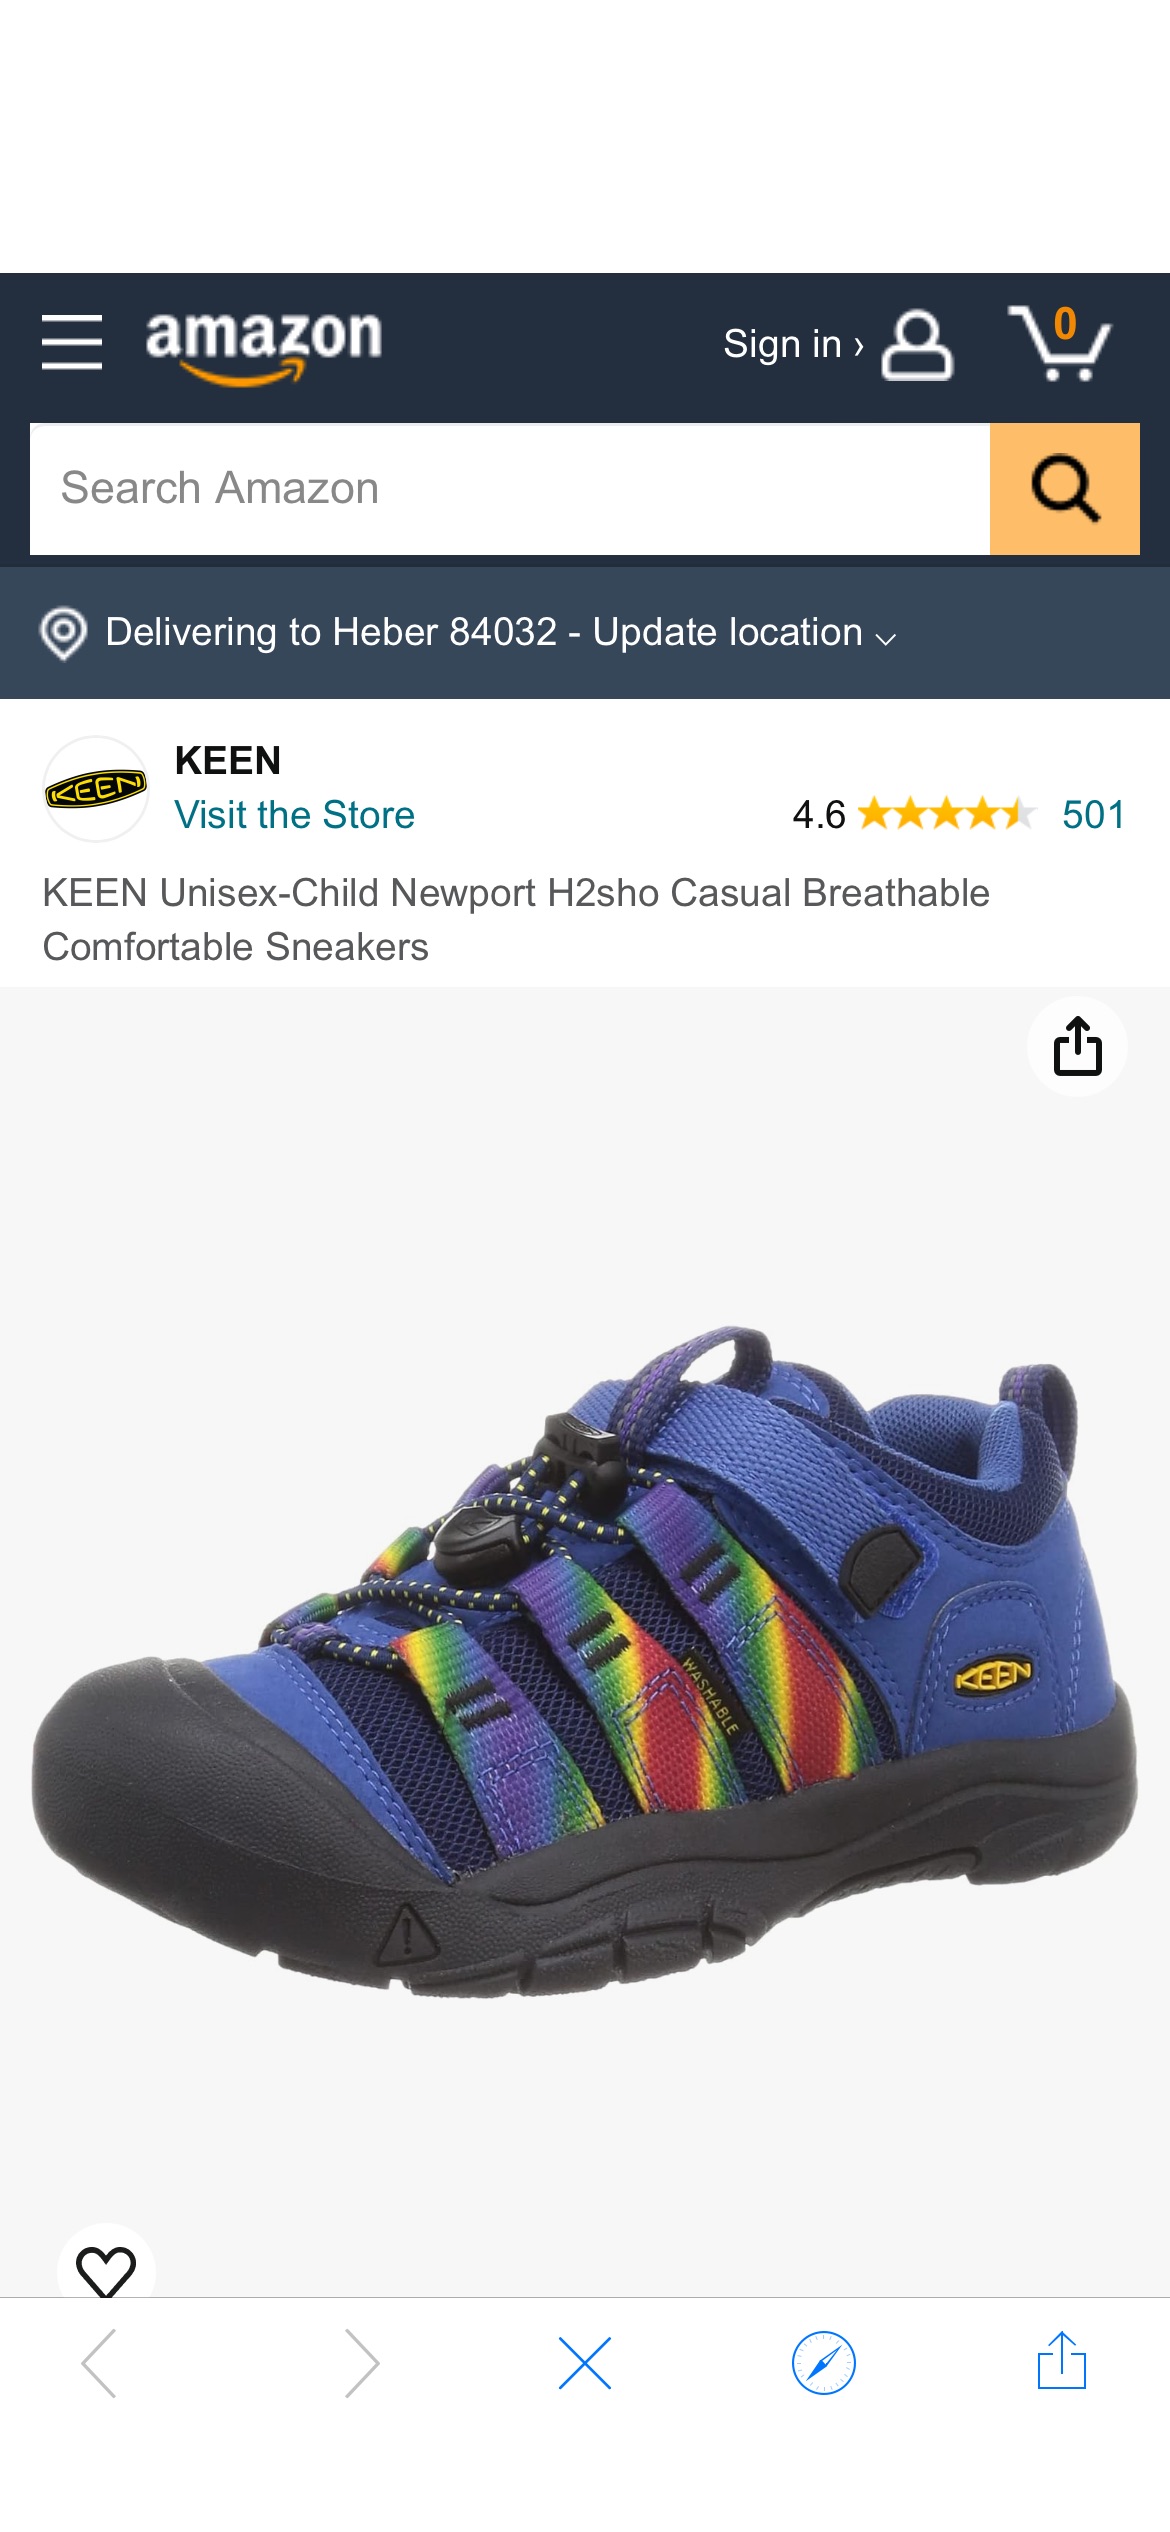 Amazon.com | KEEN Newport H2SHO Casual Breathable Comfortable Sneakers, Multi/Bright Cobalt, 10 US Unisex Little Kid | Sneakers